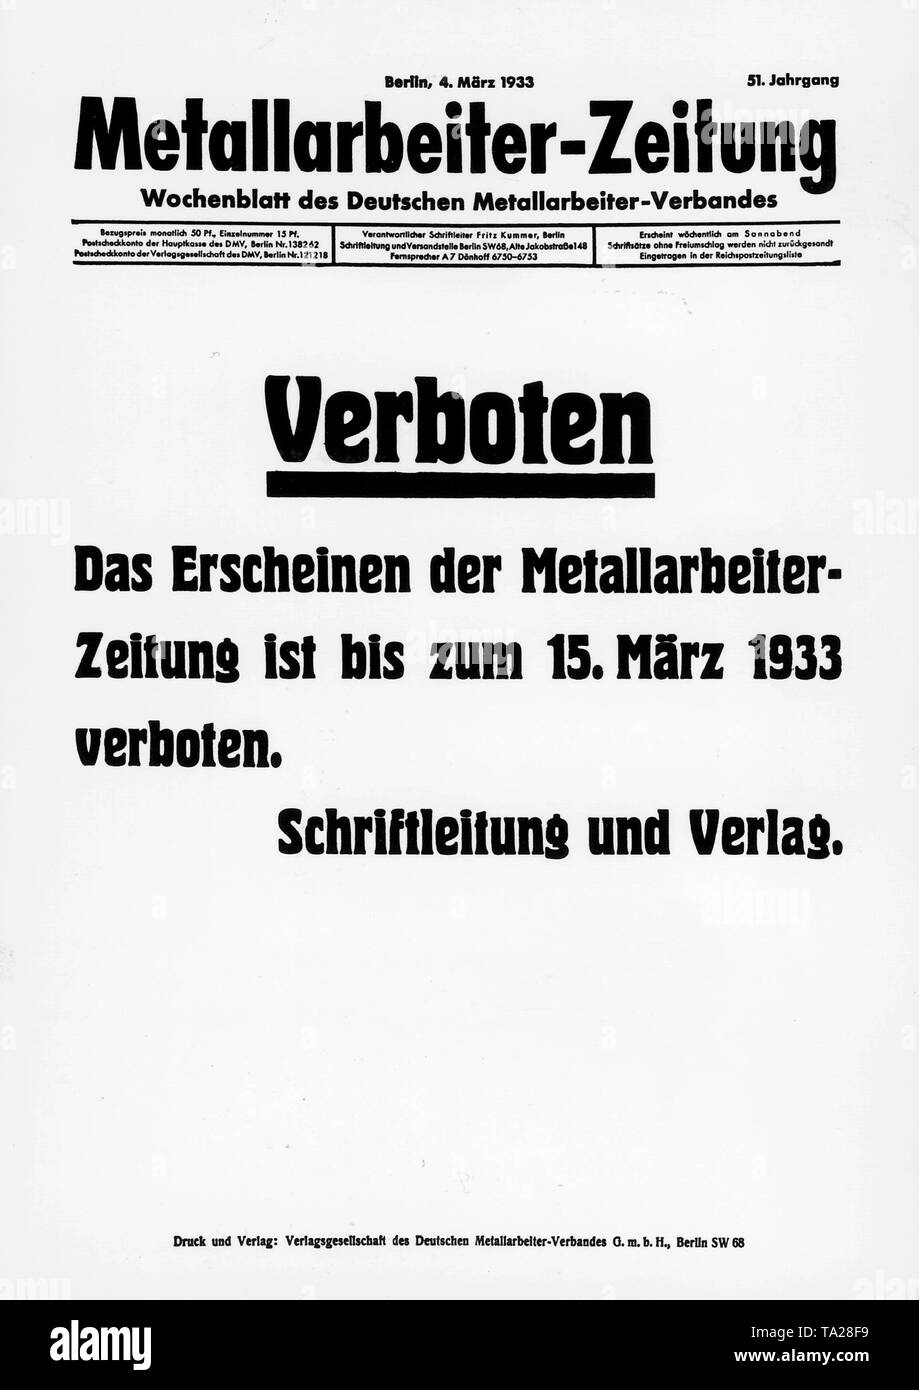 On March 4. in 1933, the German Metal Workers' Union (DMV) newspaper is prohibited by the Nazis Stock Photo